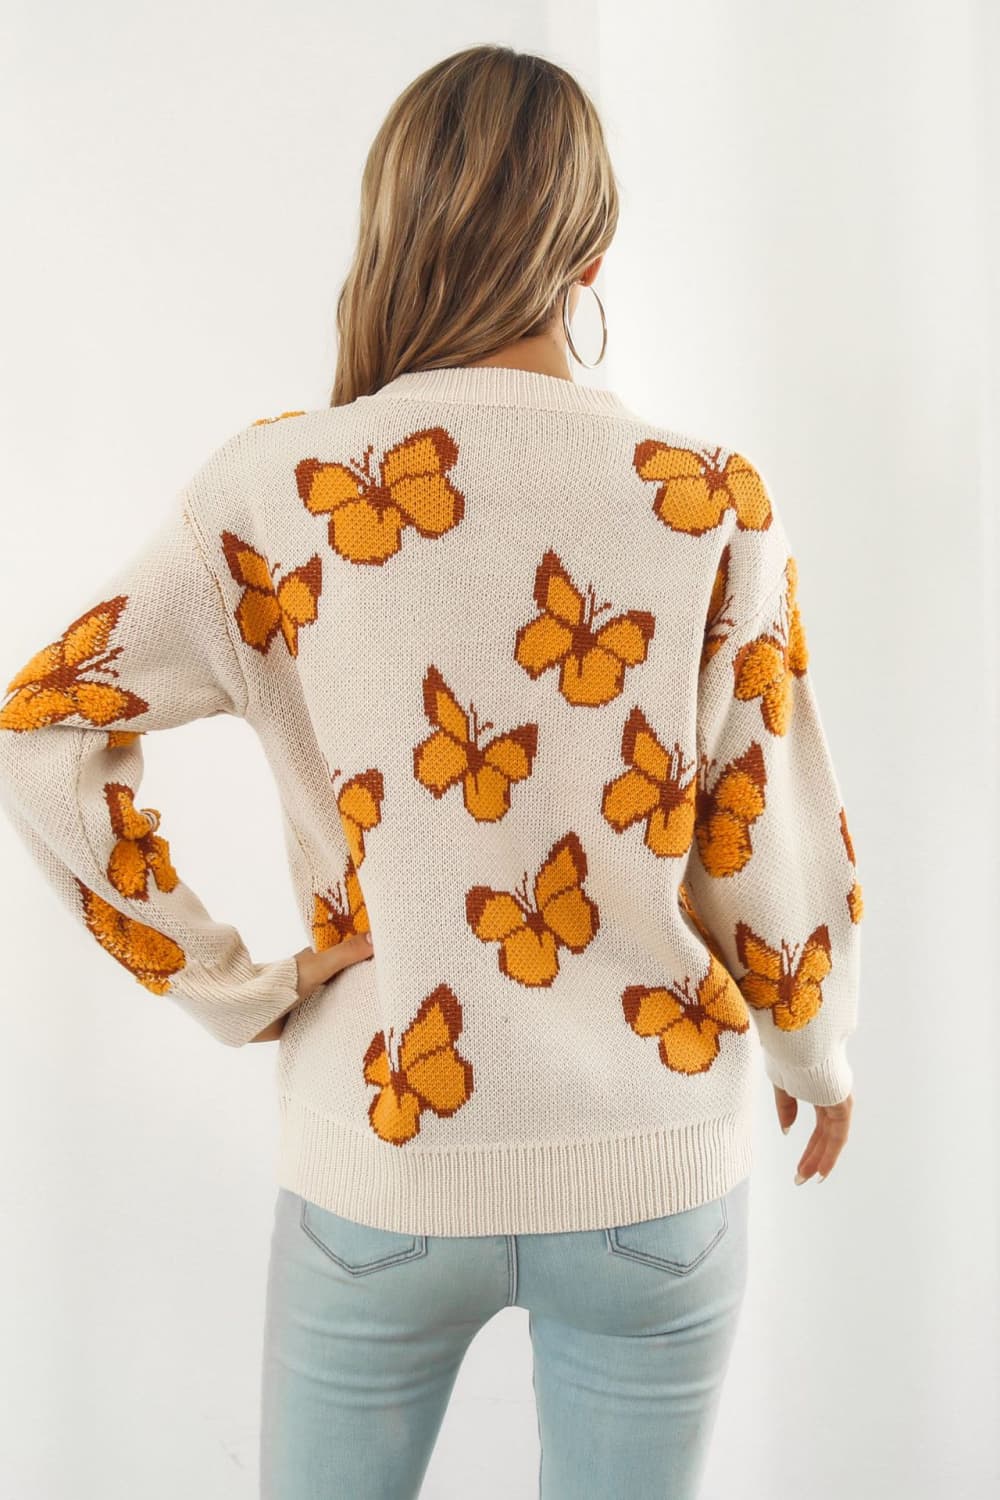 Fuzzy Monarch Butterfly Raised Shag Bold Colors Knit Pullover Sweater Shirt